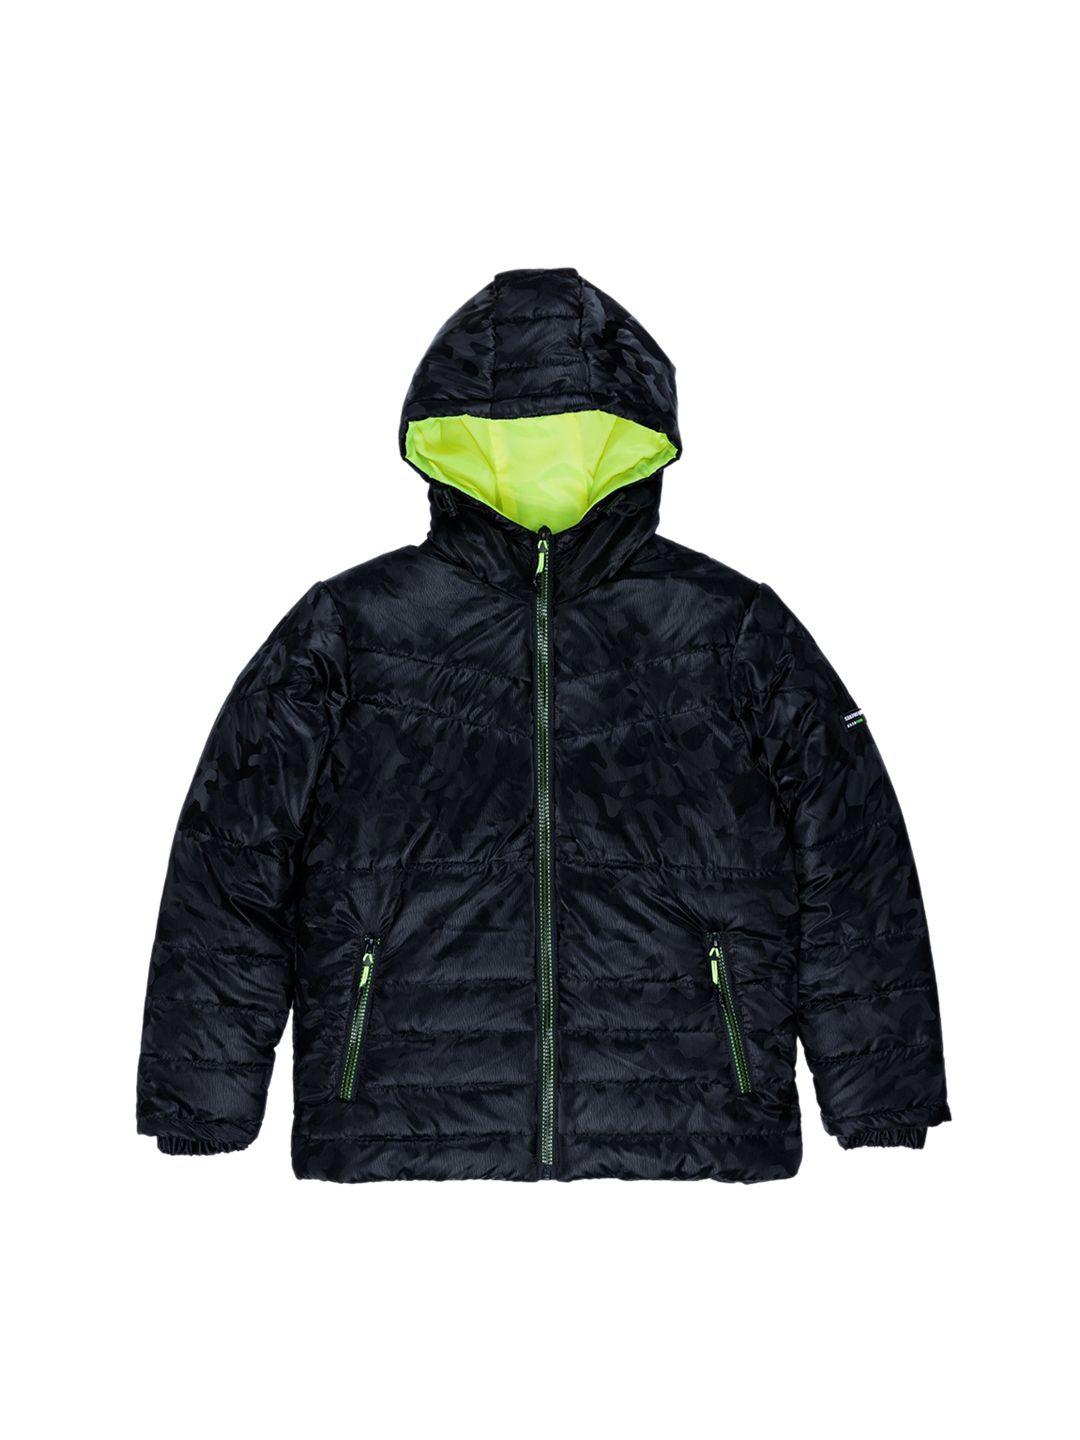 status quo boys black quilted  hooded jacket